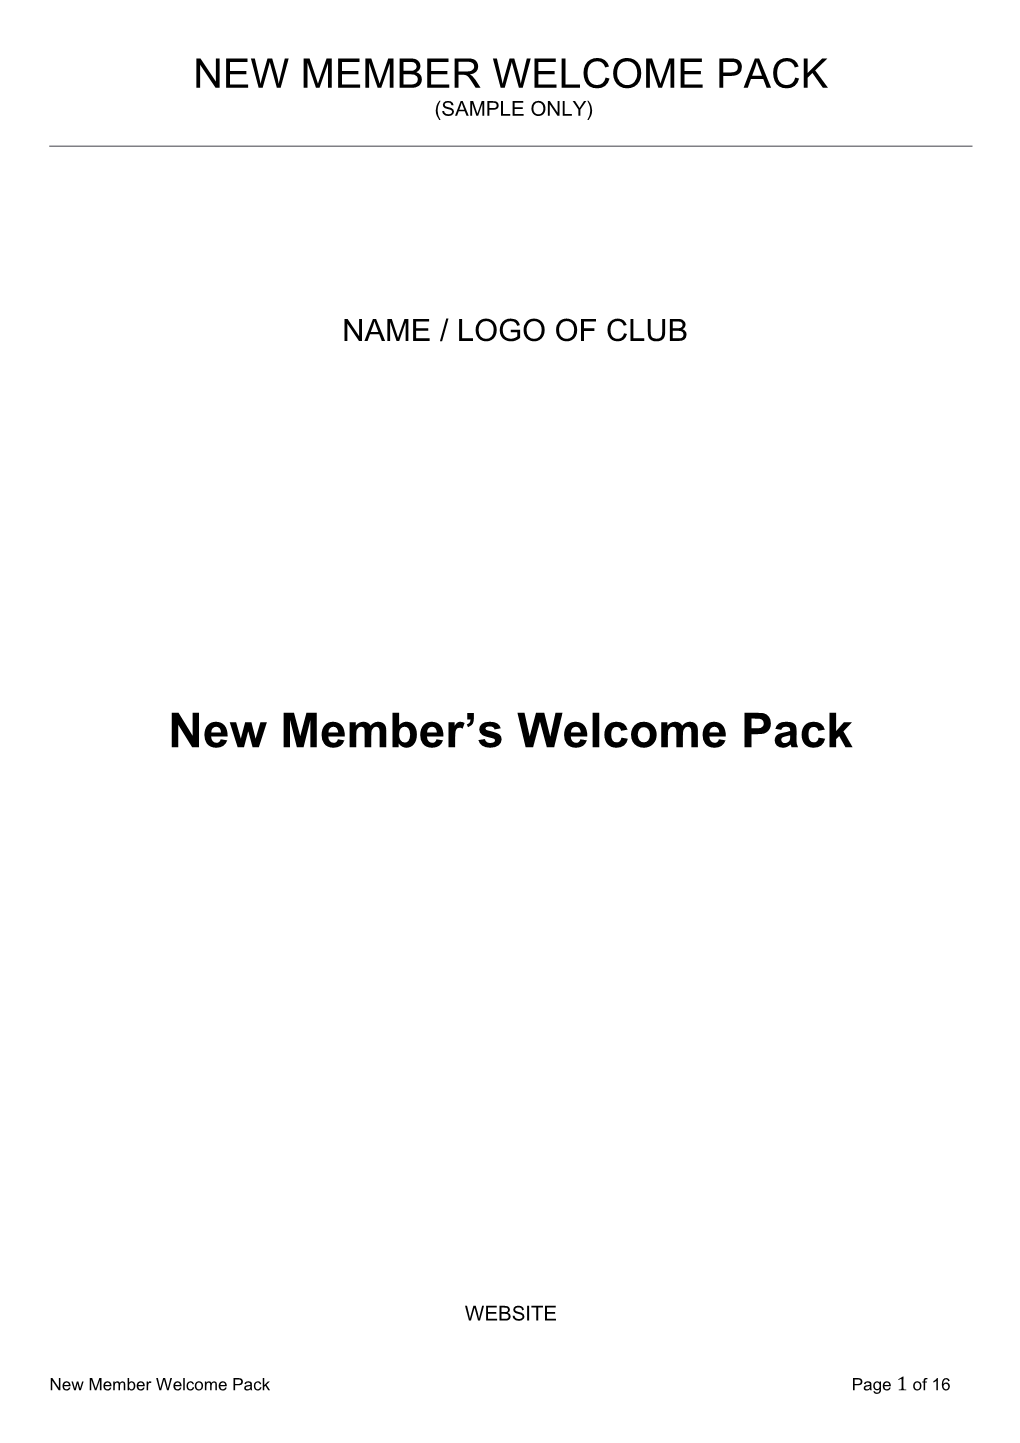 Thank You for Becoming a Member of Name of Club